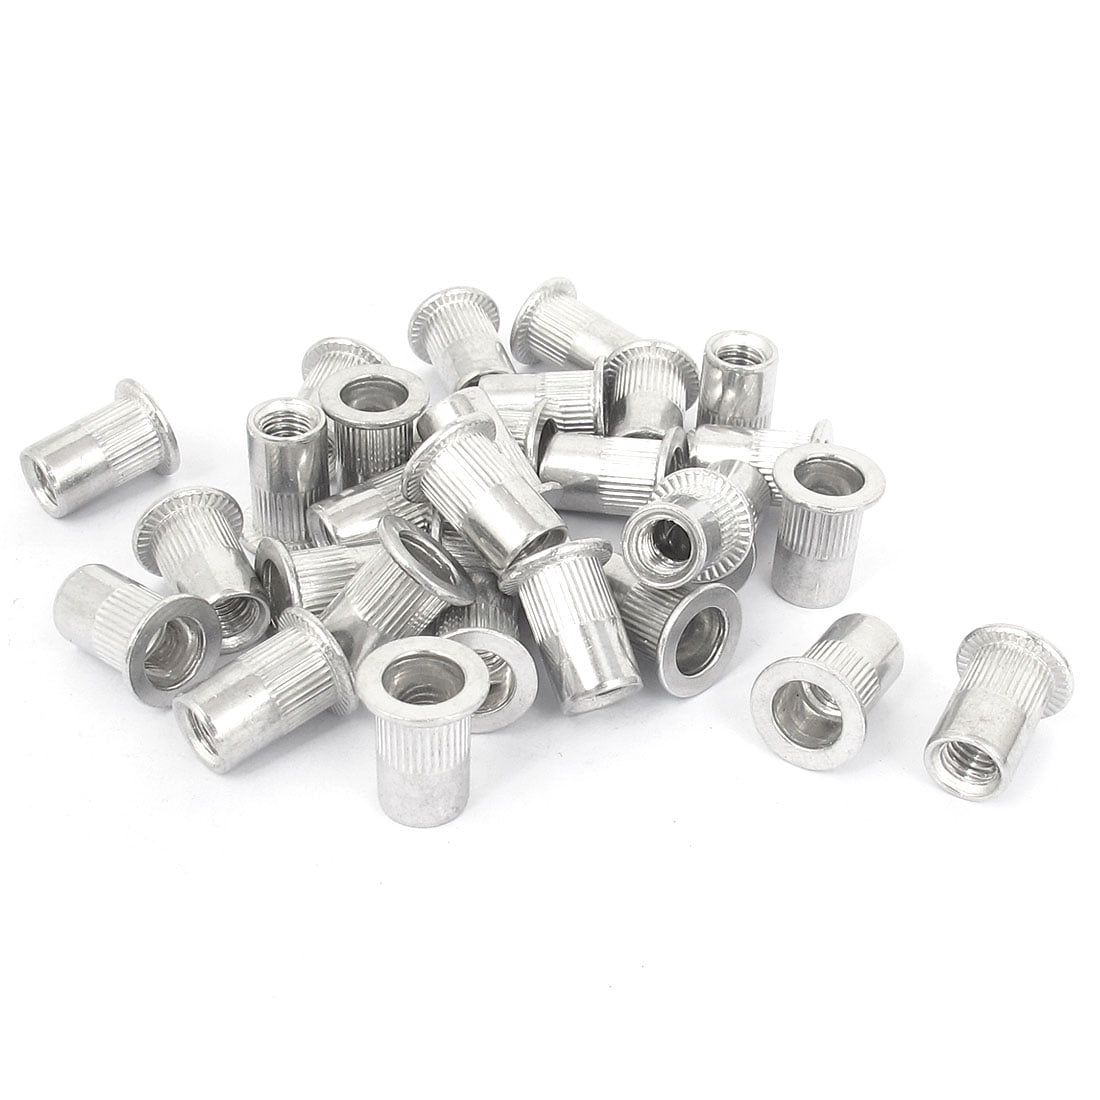 uxcell Blind Rivets 25pcs 304 Stainless Steel Pull Rivets Core Decoration Rivets 6.4mm Diameter 12mm Grip Length Silver Tone